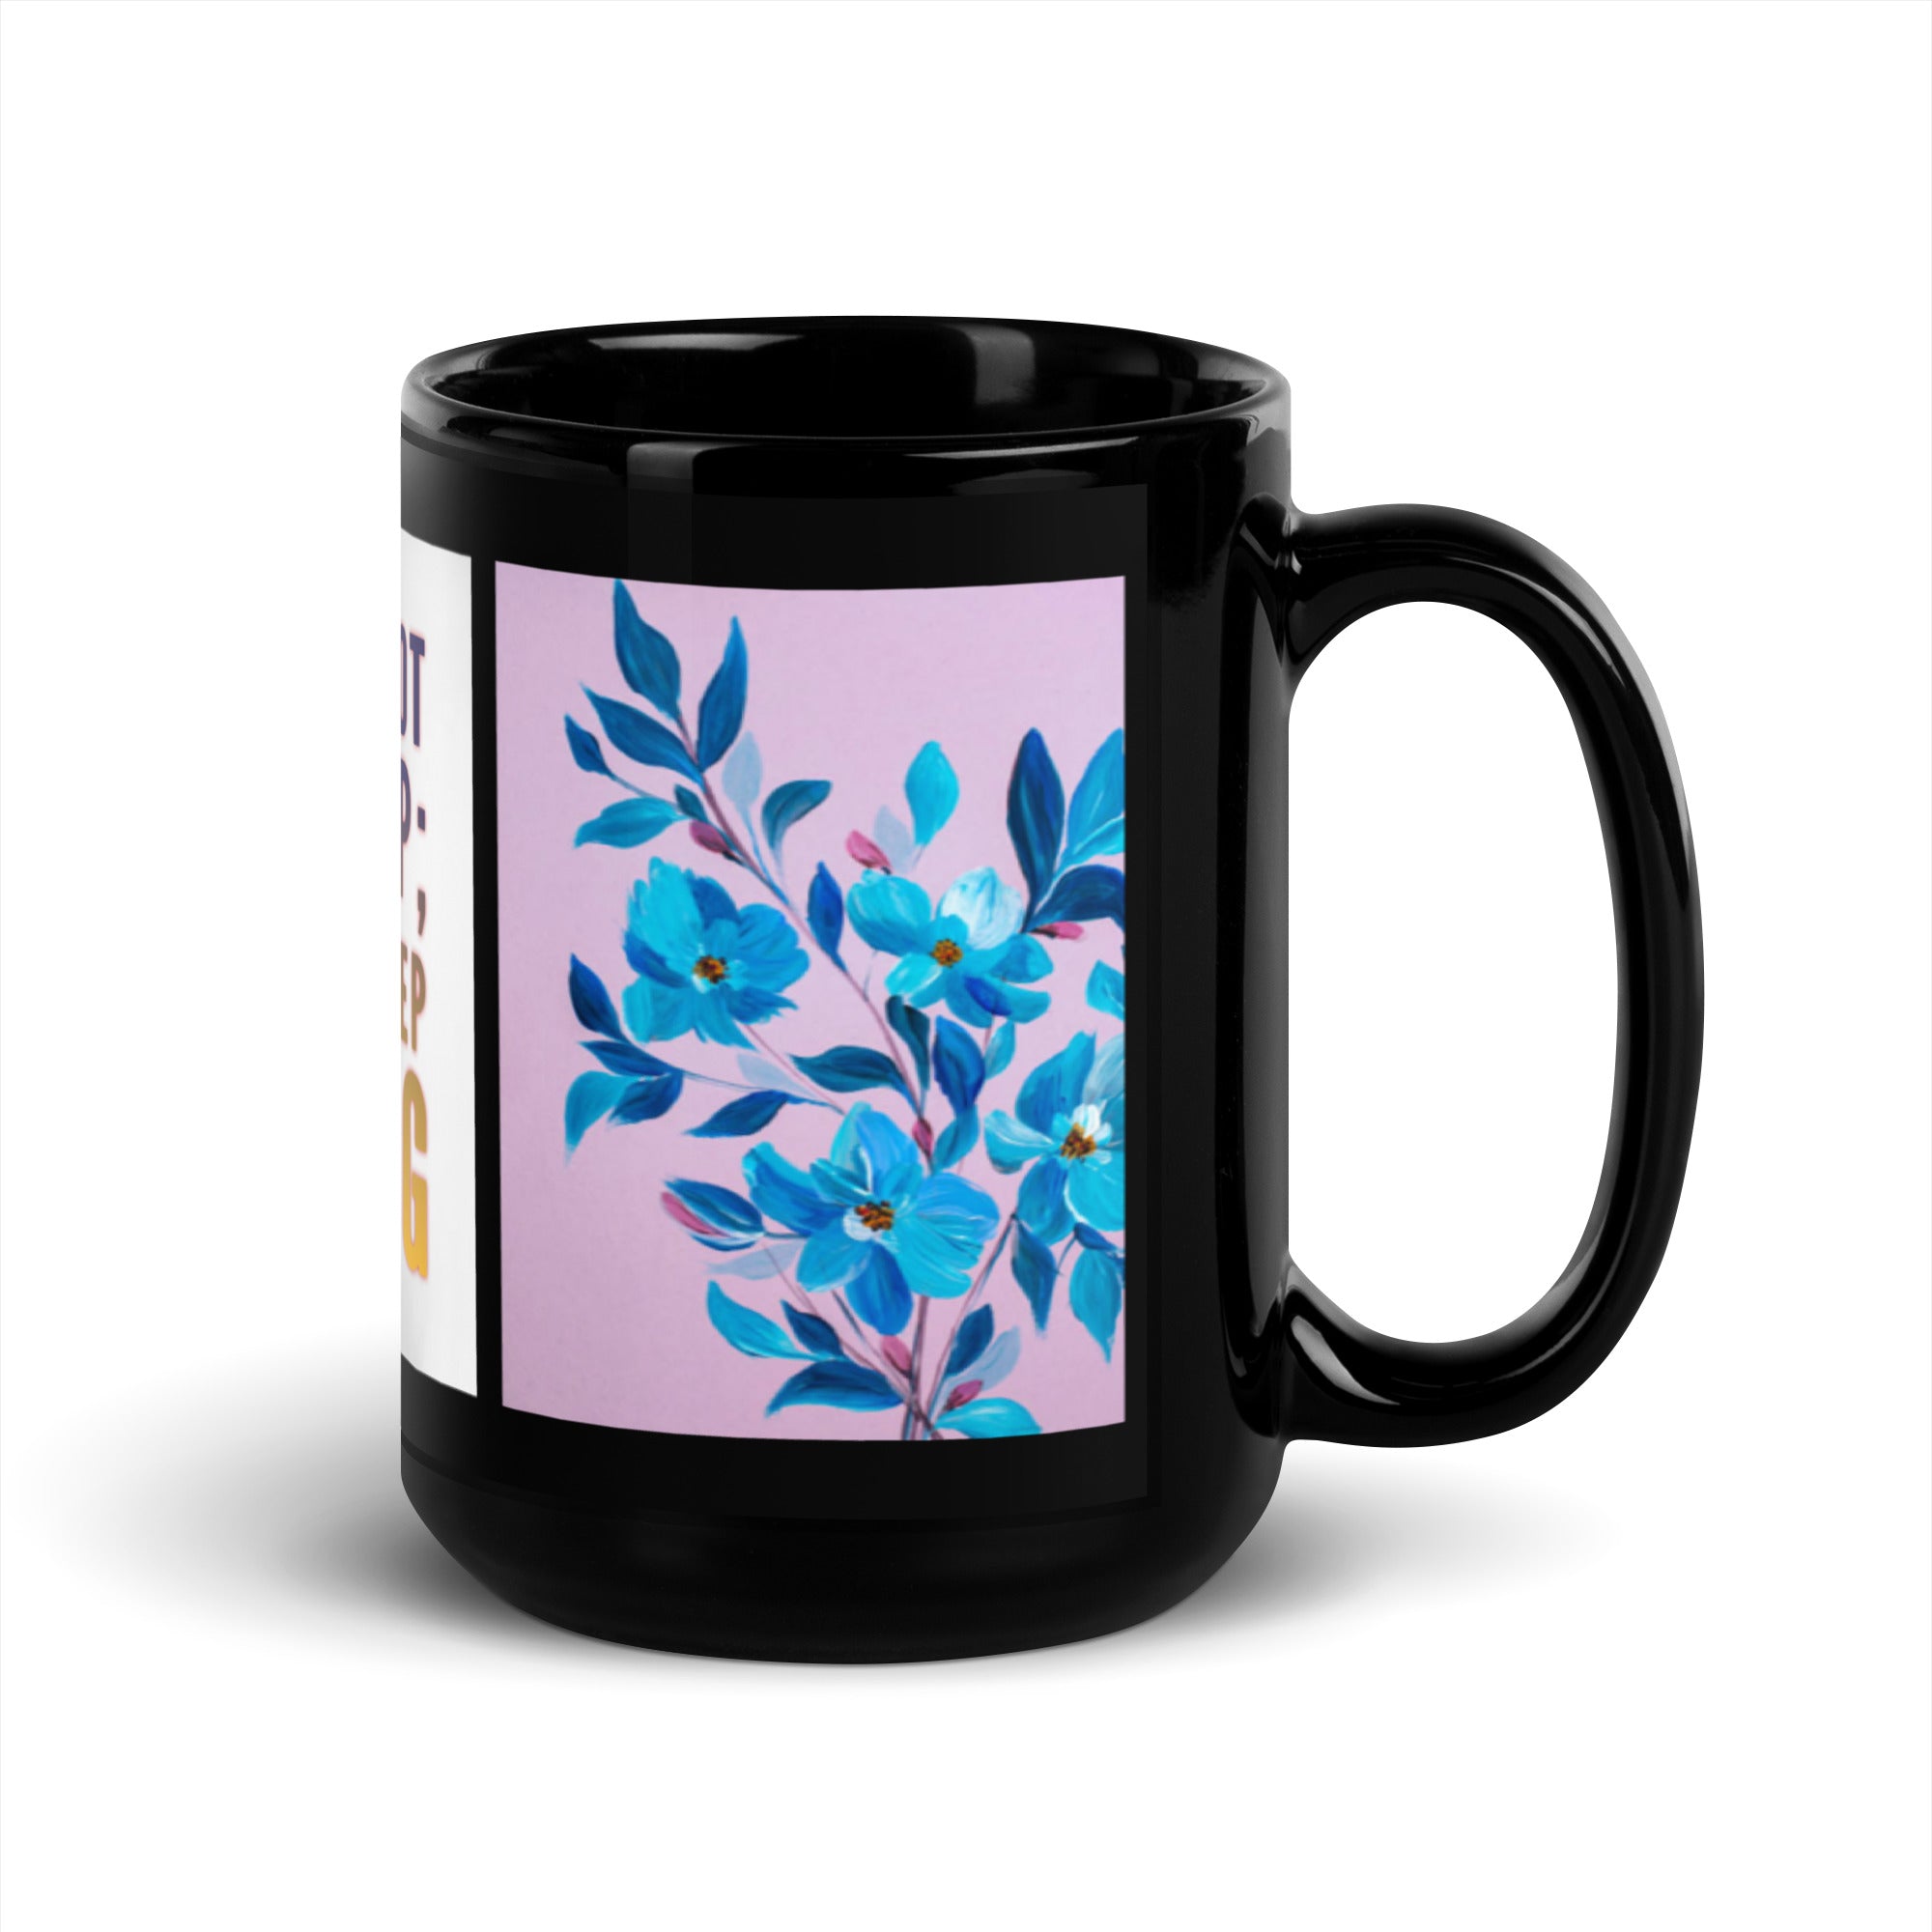 GloWell Designs - Black Glossy Mug - Affirmation Quote - I Will Not Give Up - GloWell Designs